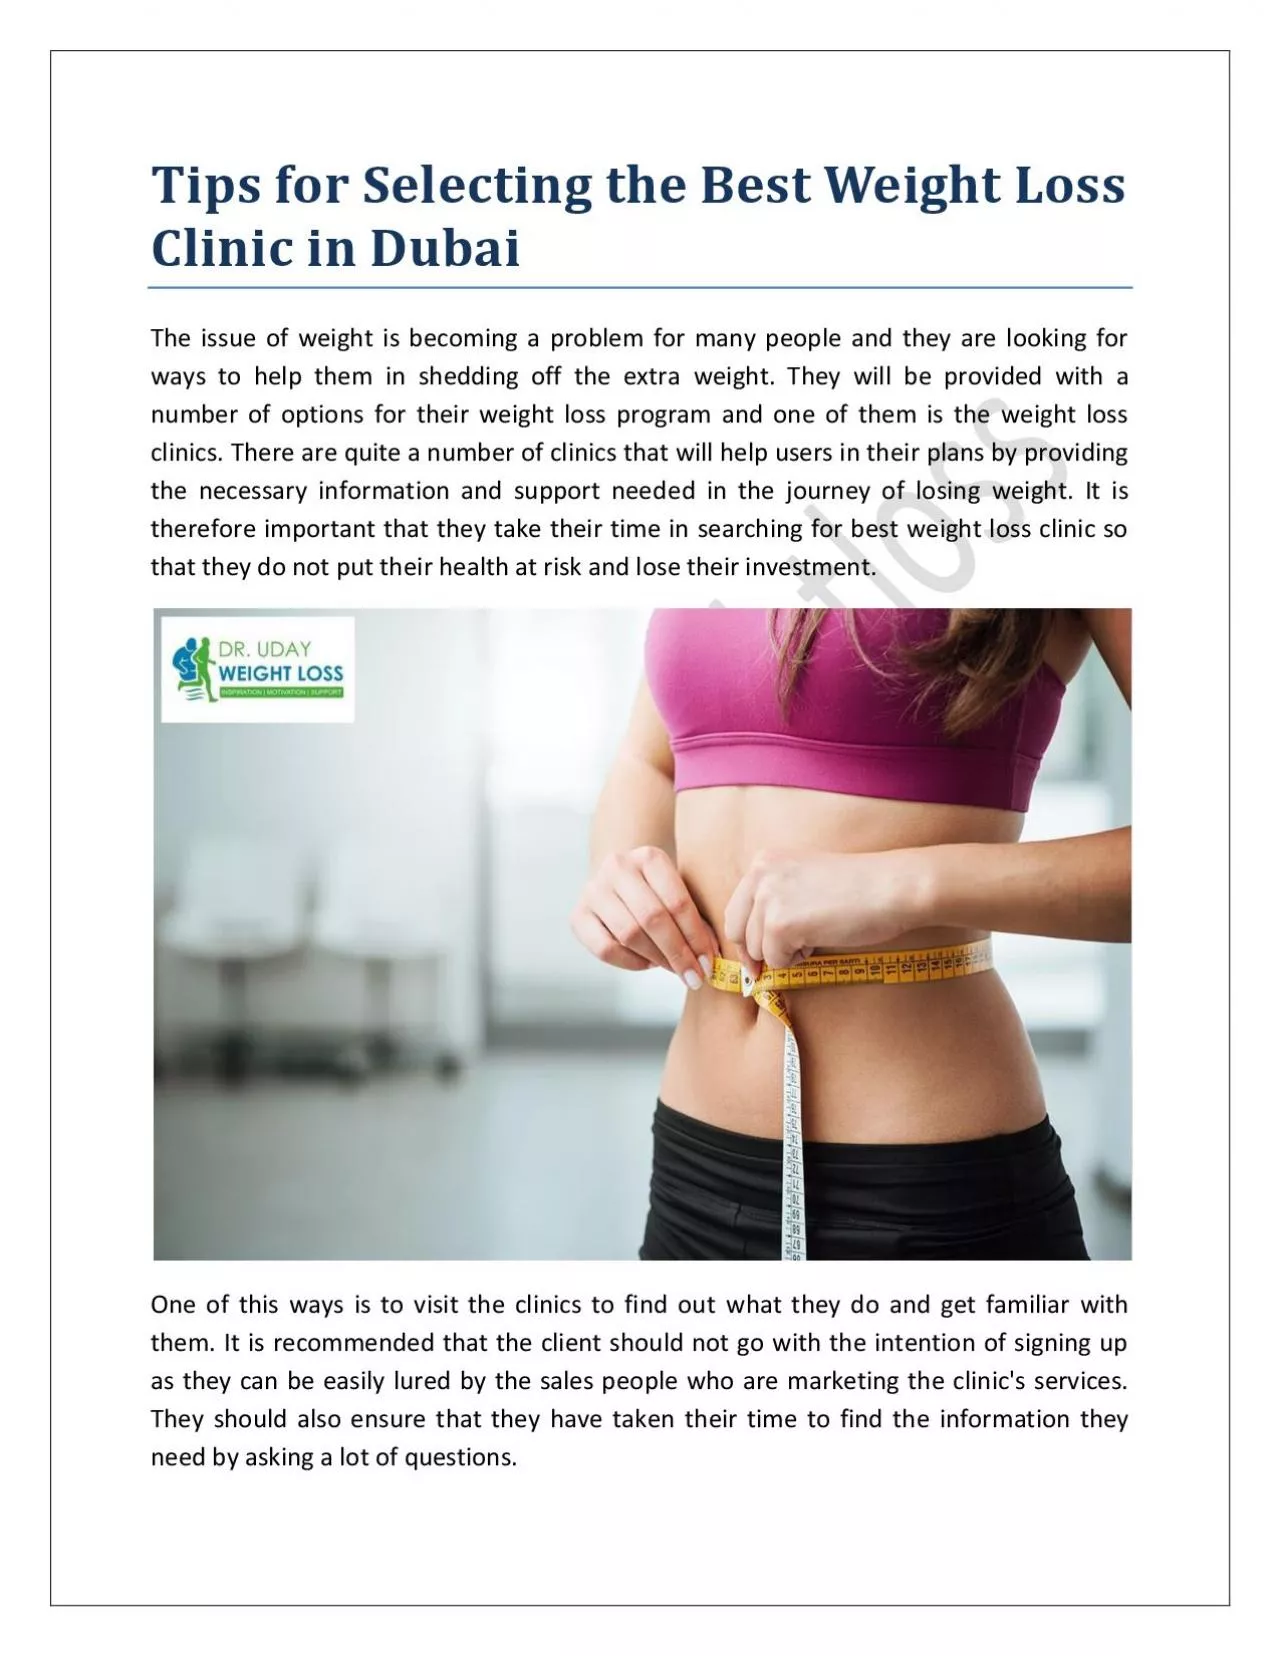 Tips for Selecting the Best Weight Loss Clinic in Dubai